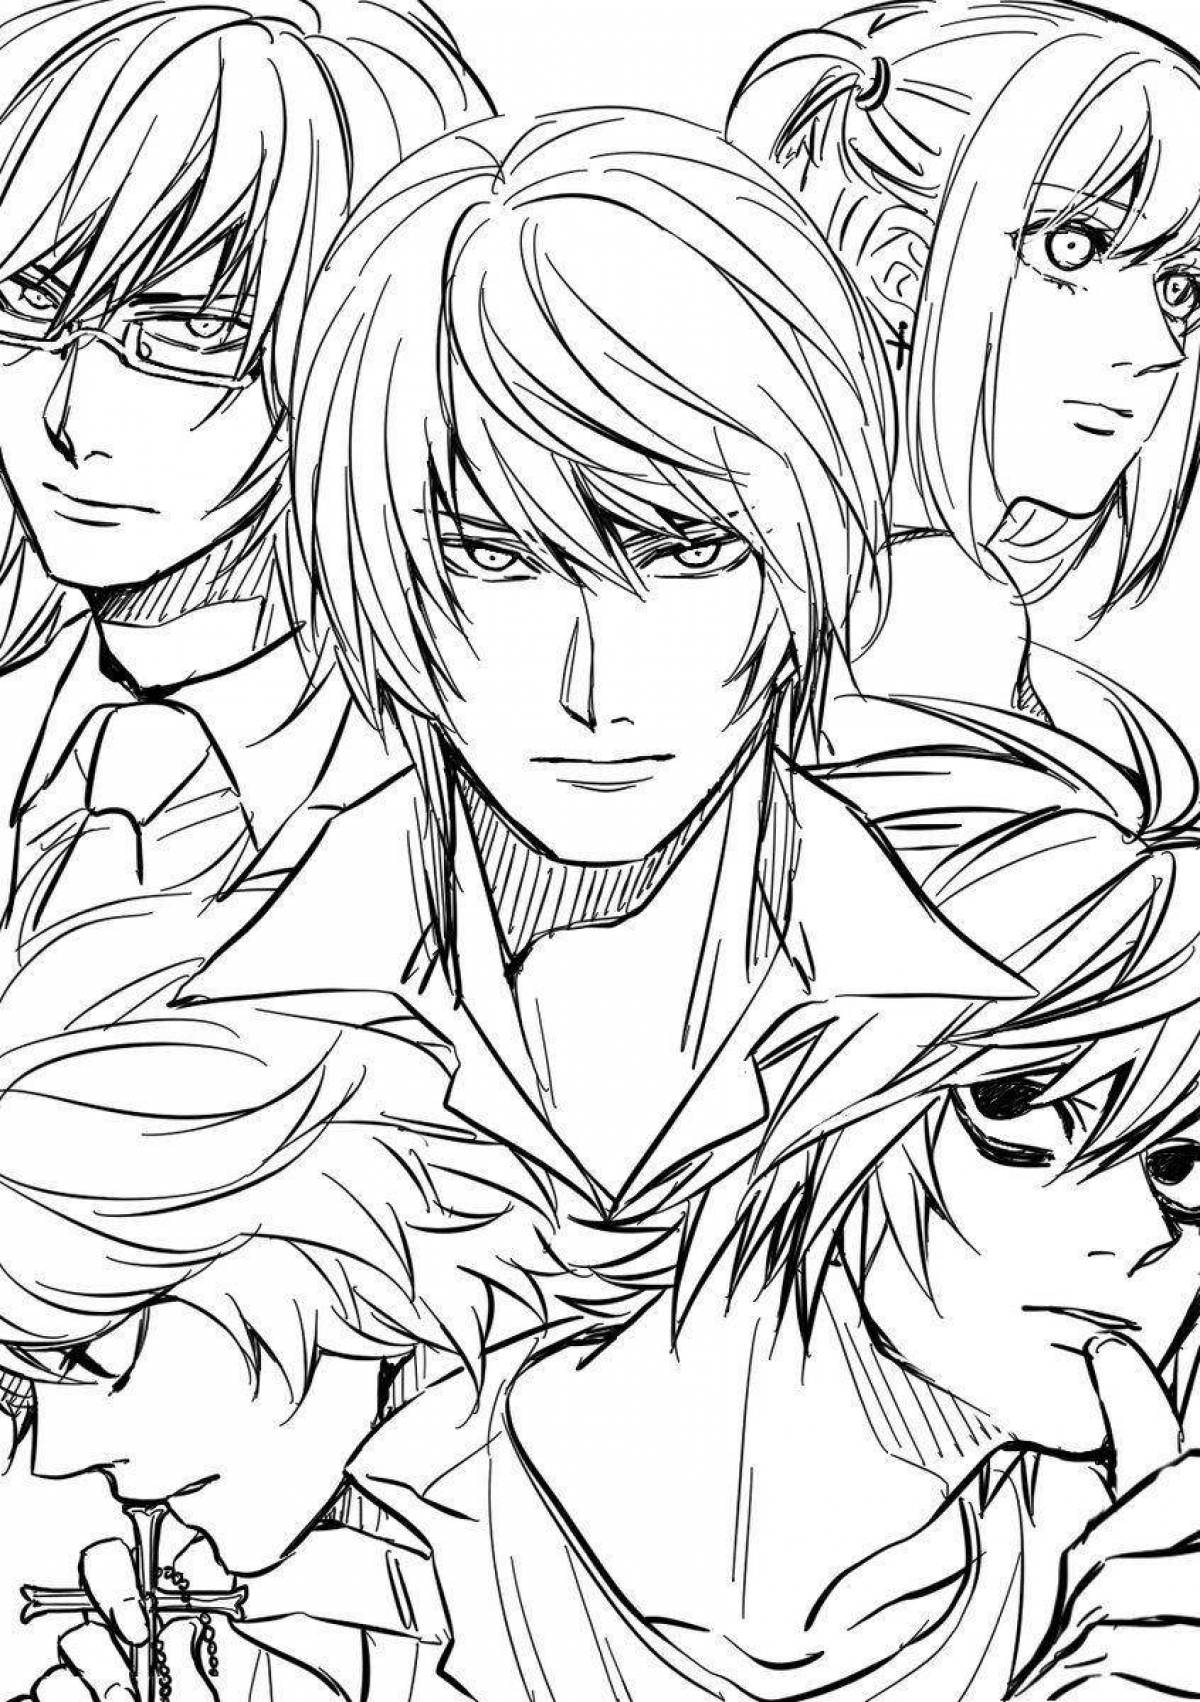 Fabulous death note coloring page